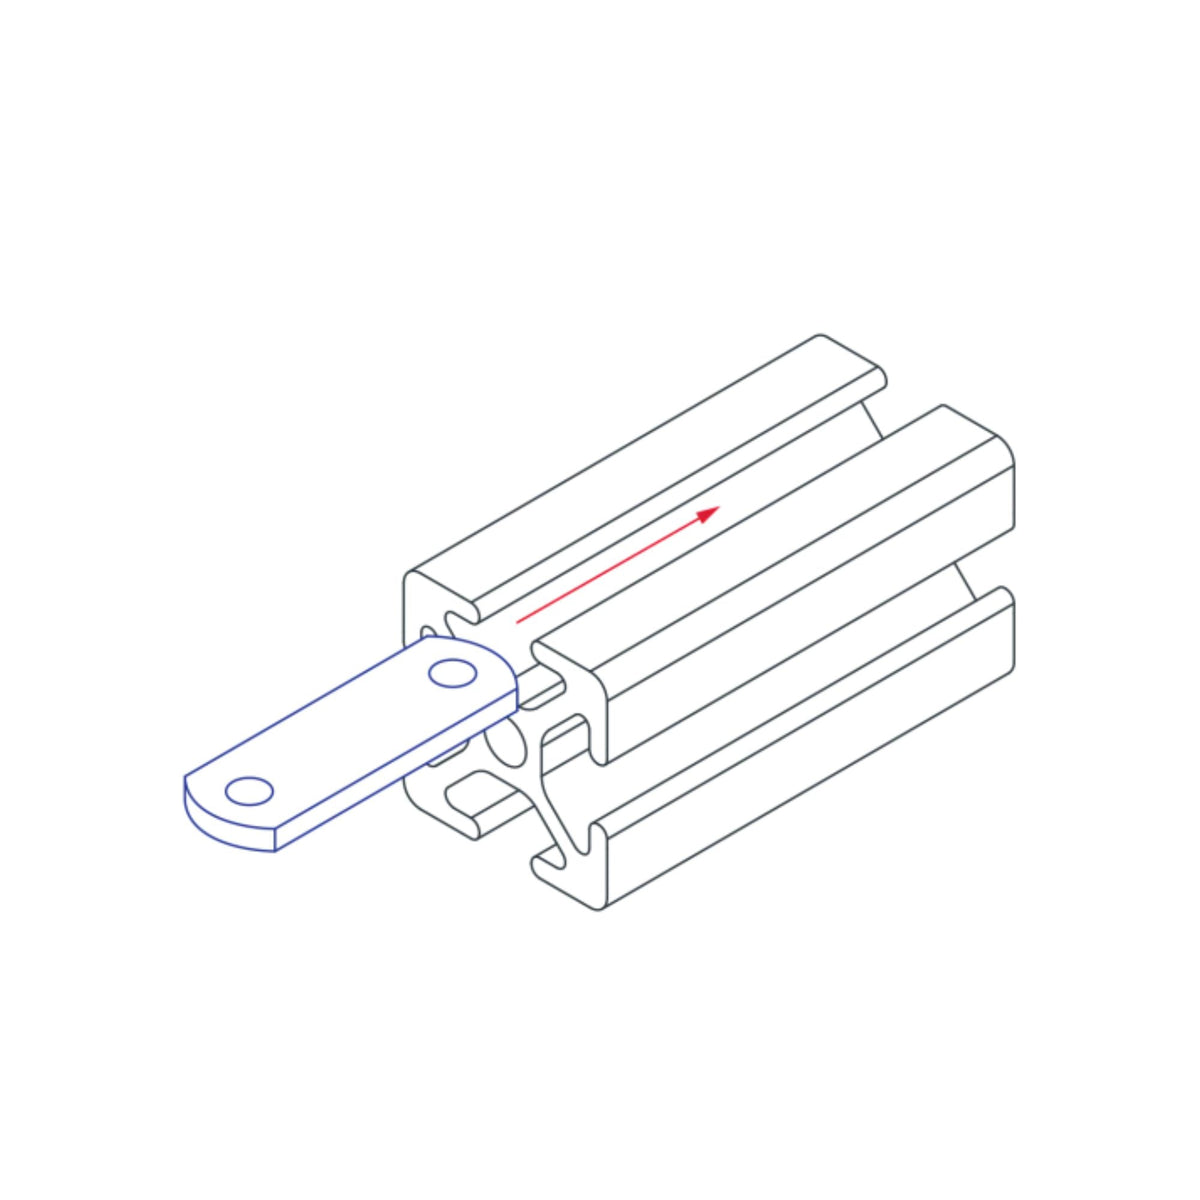 diagram of a t-nut being inserted into a t-slot bar